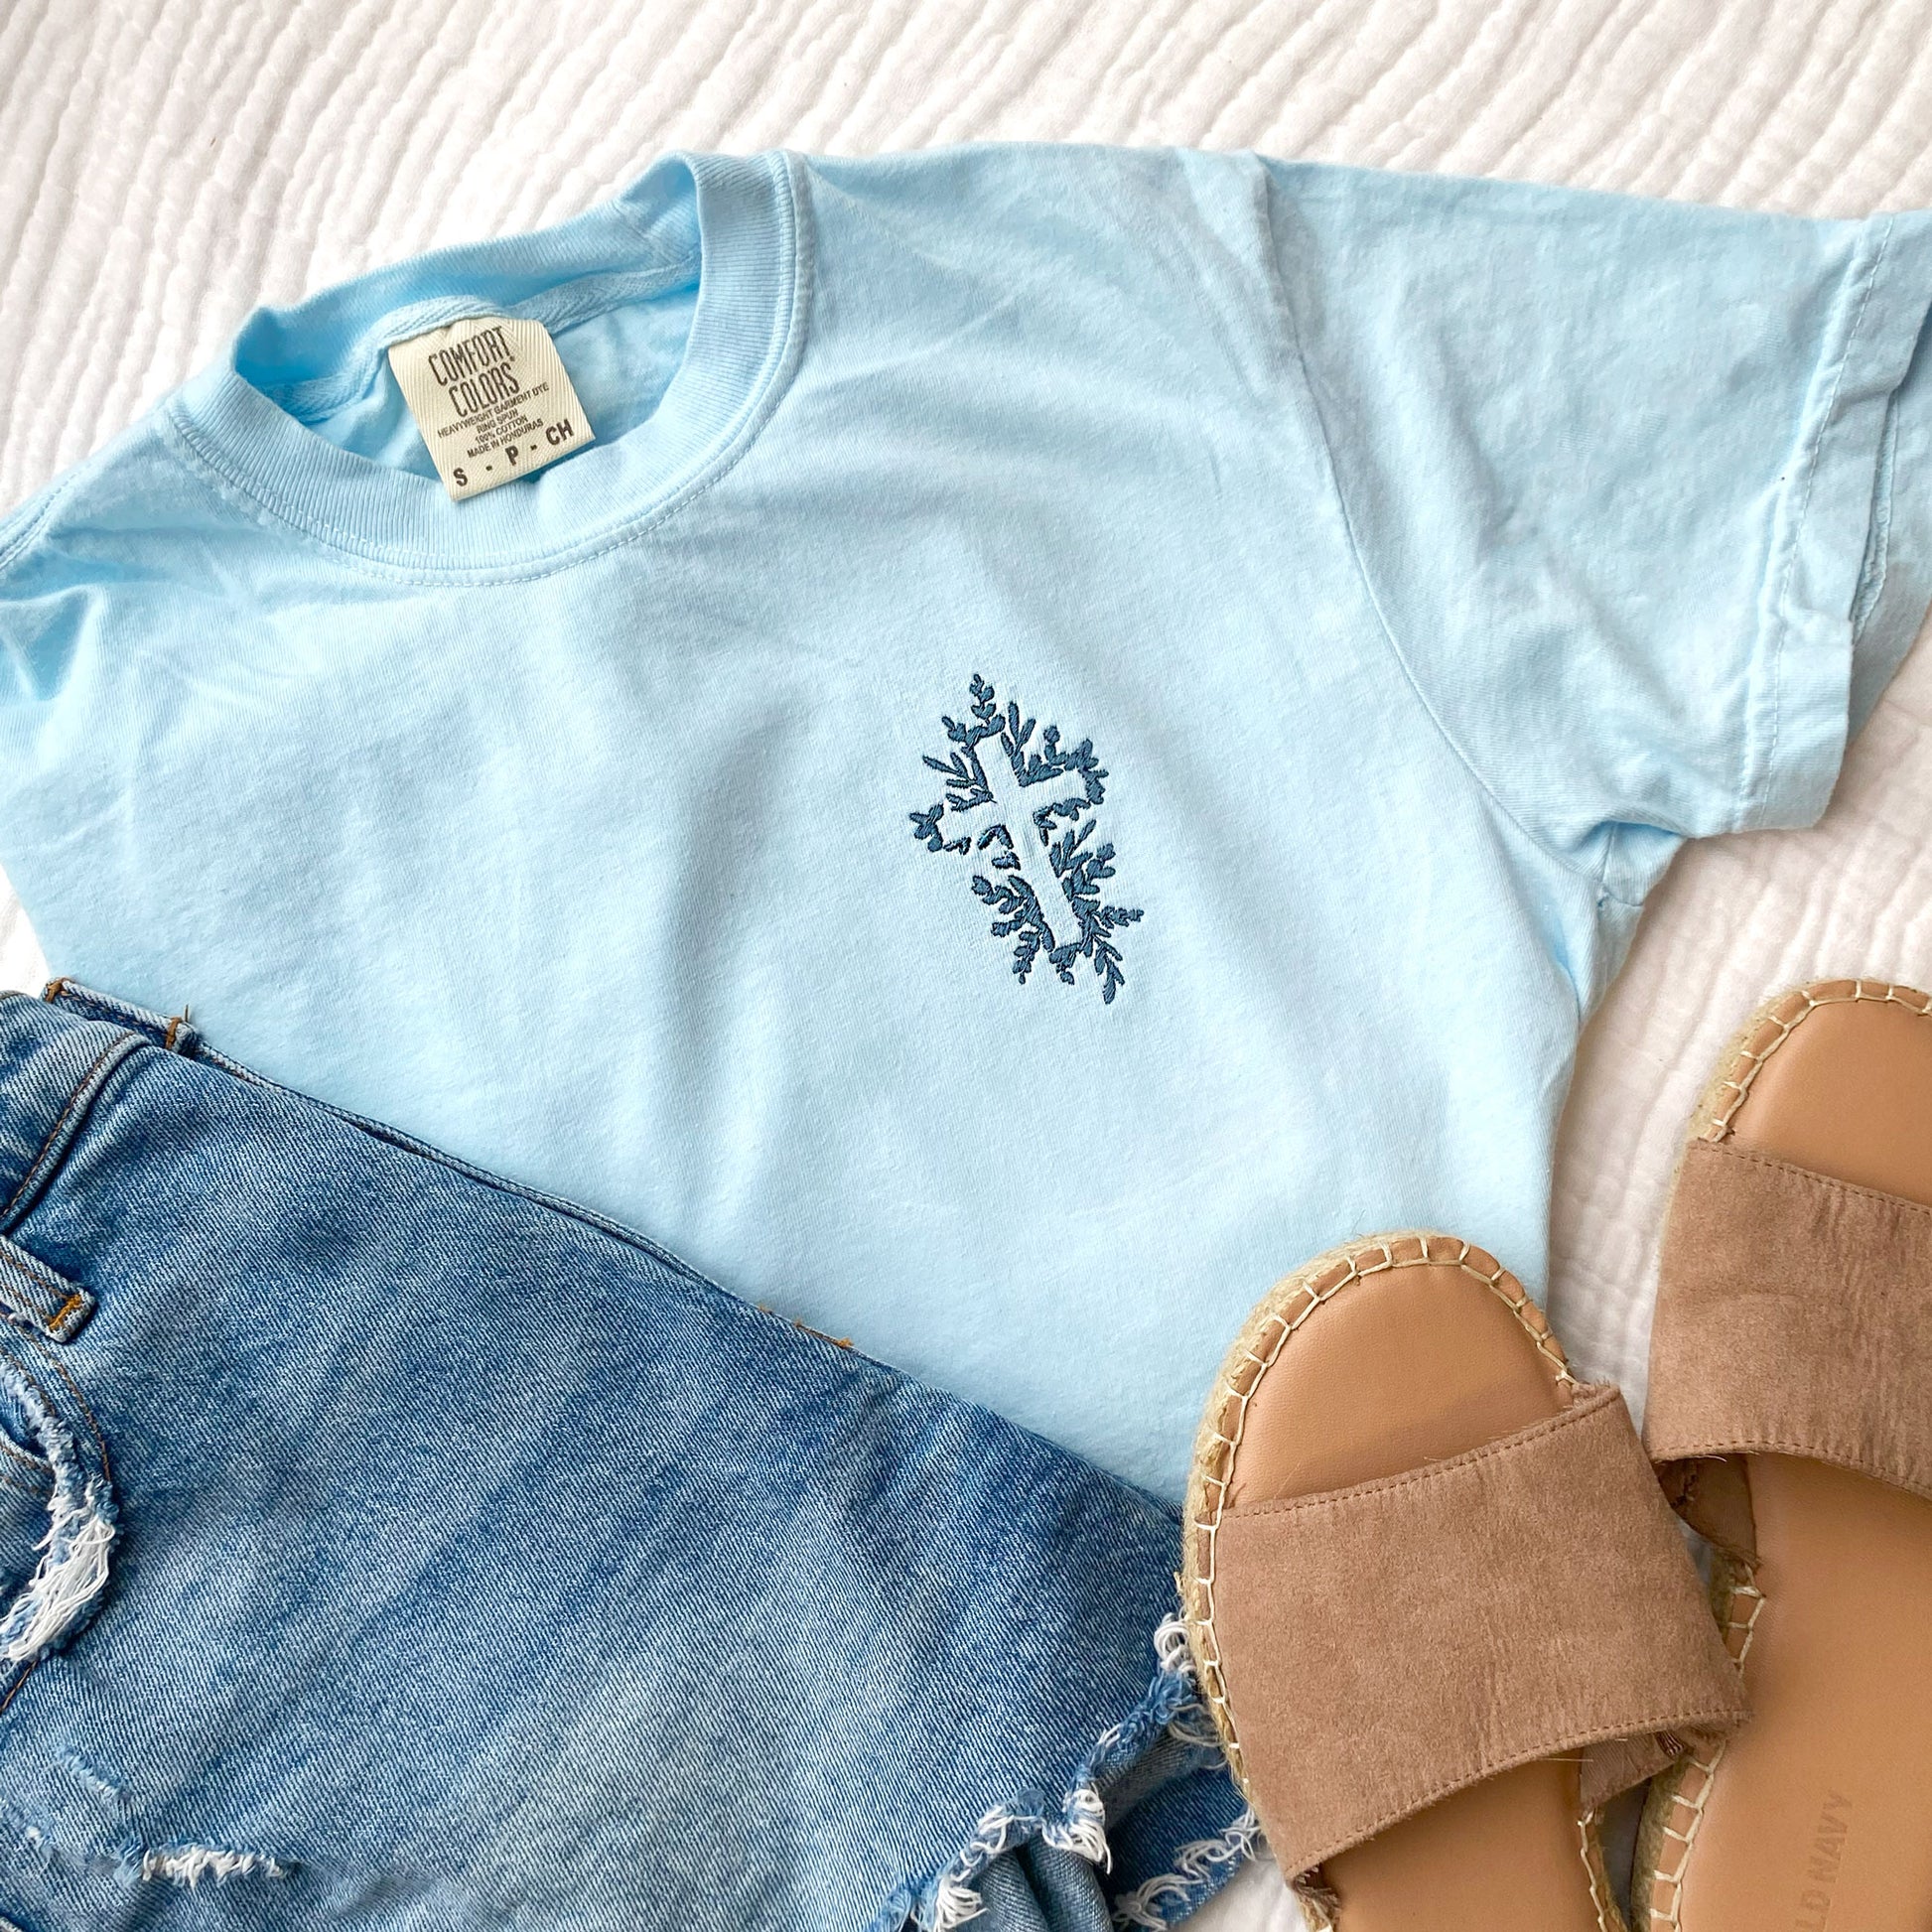 chambray comfort colors t-shirt with a floral embroidered cross in french blue thread and a pair of jean shorts sstyled with sandals